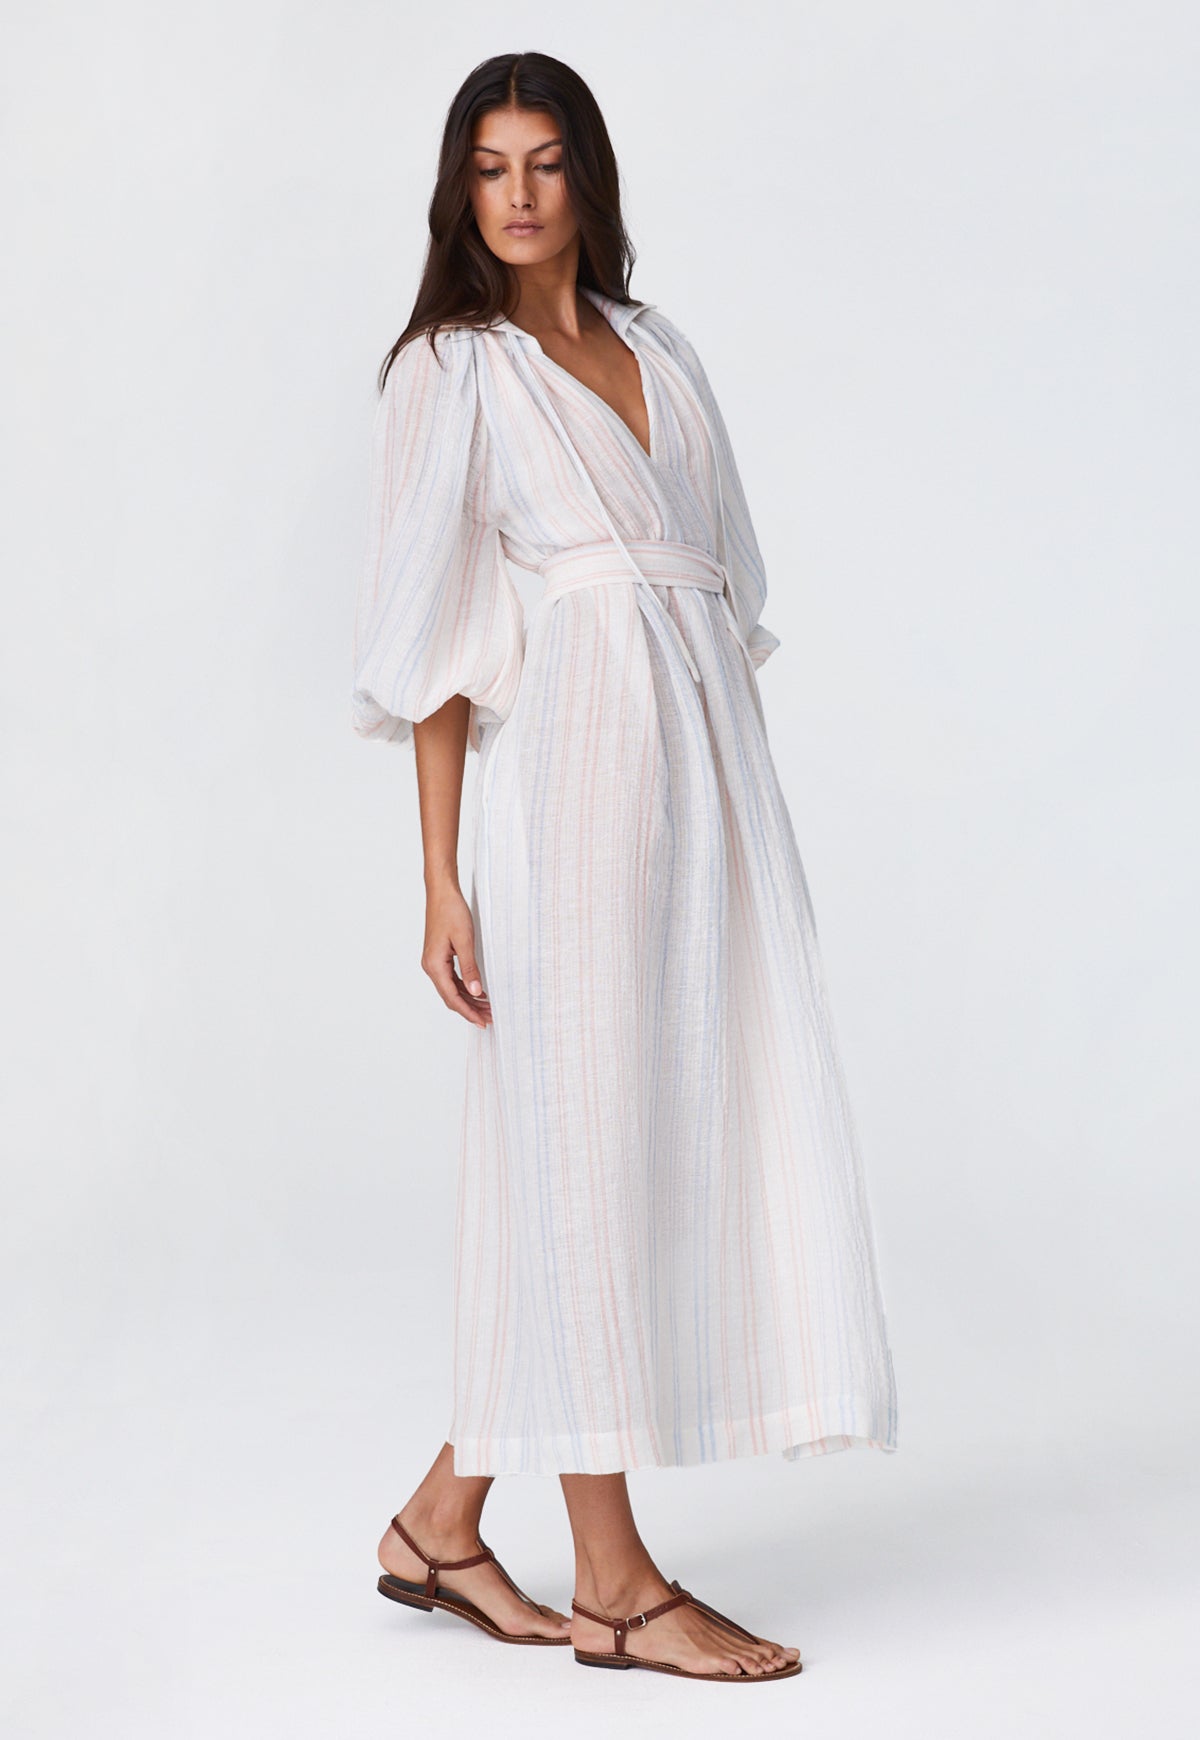 THE POET DRESS  in WHITE & PINK & BLUE STRIPED GAUZE